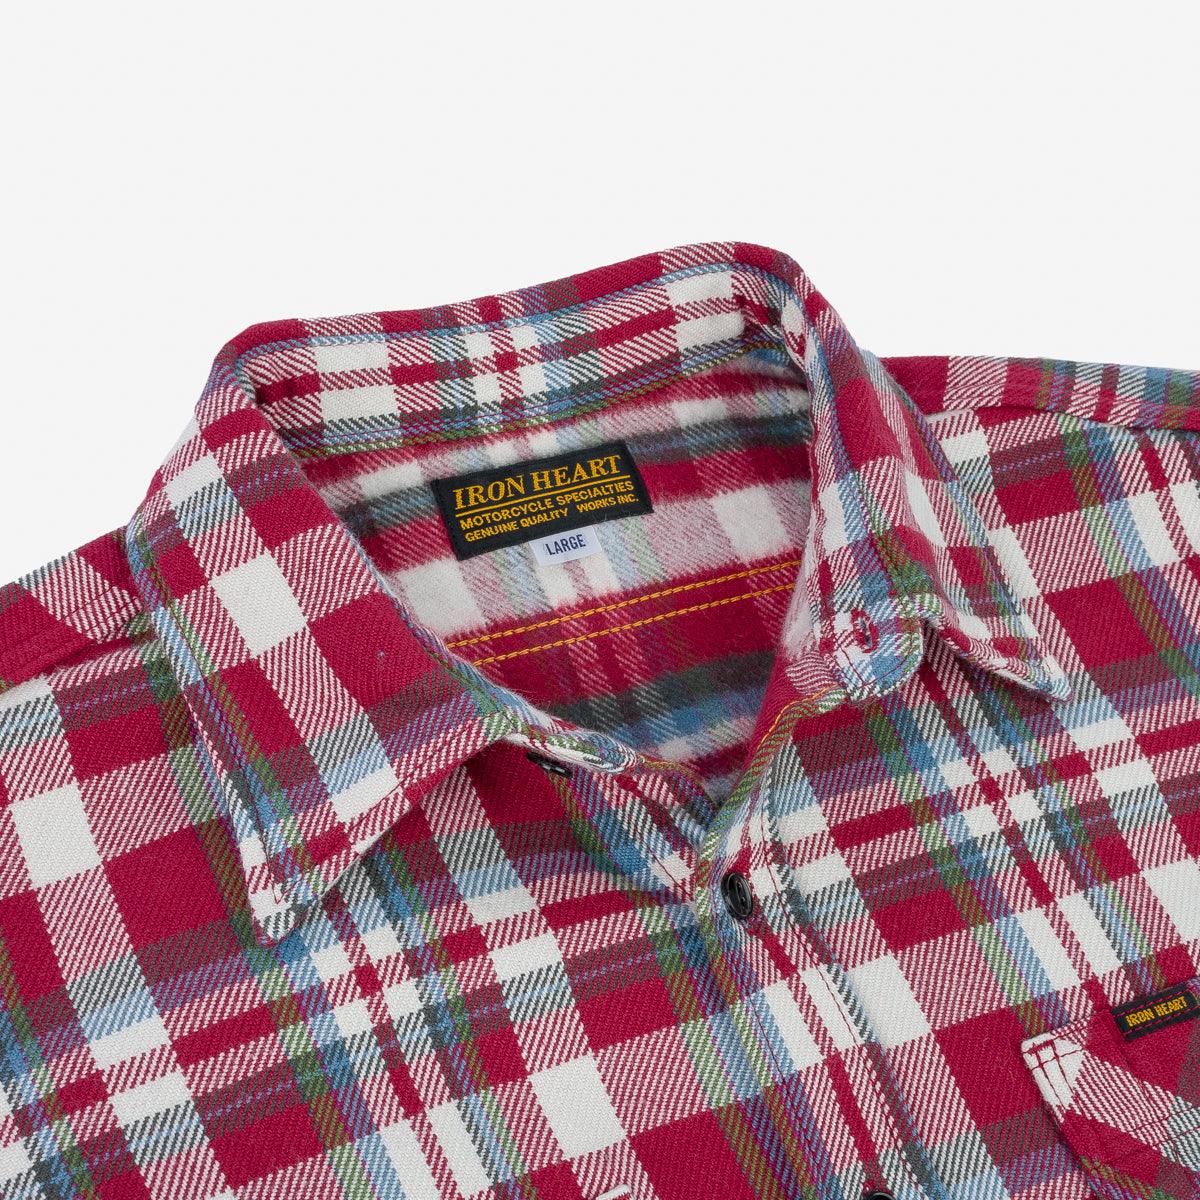 IHSH-371-RED - Ultra Heavy Flannel Crazy Check Work Shirt - Red